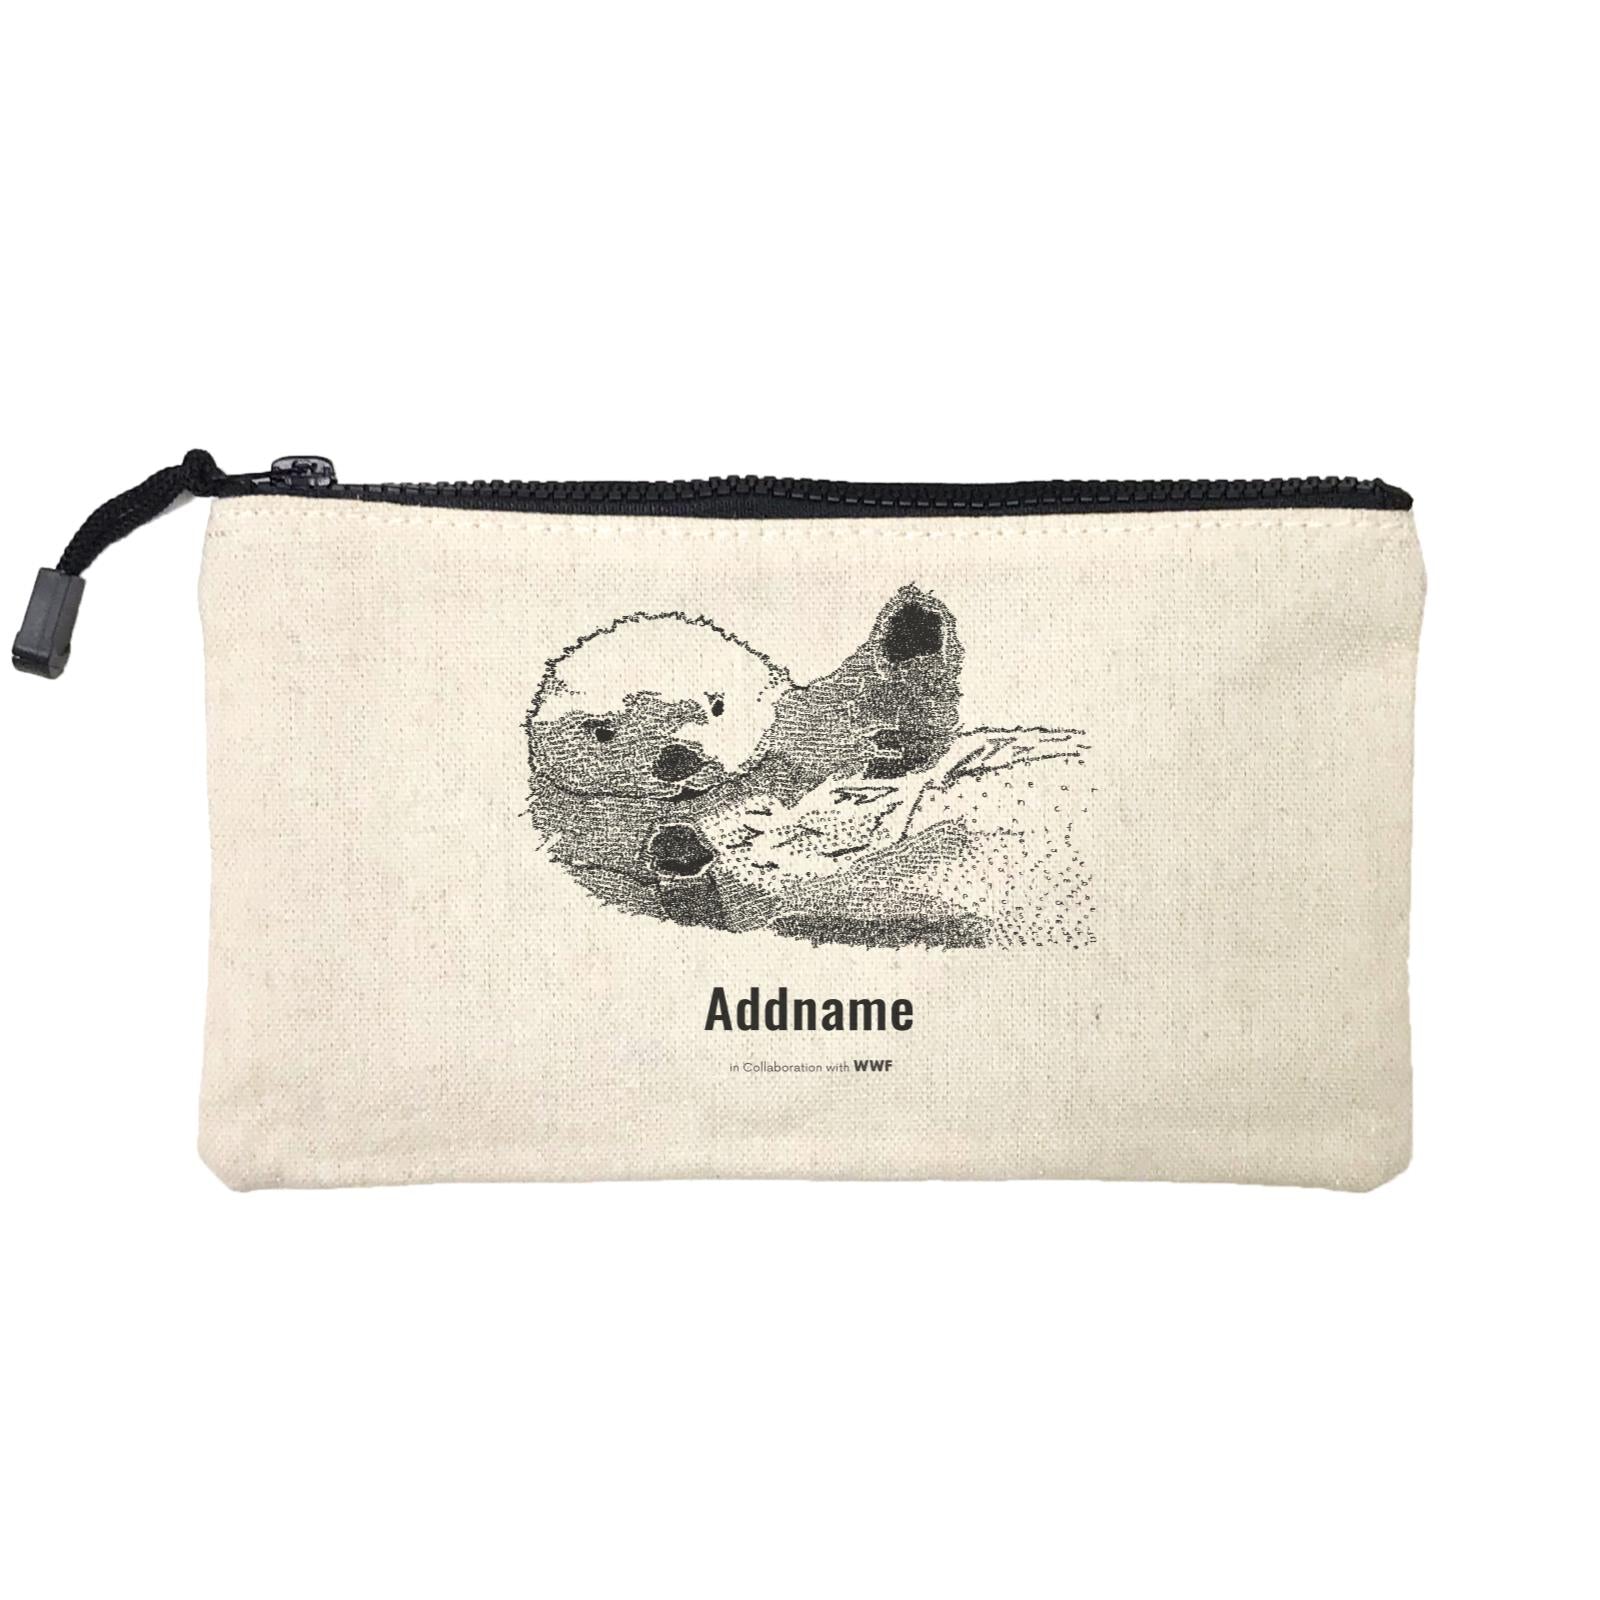 Hand Written Animals Sea Otter By ArtC Addname Mini Accessories Stationery Pouch